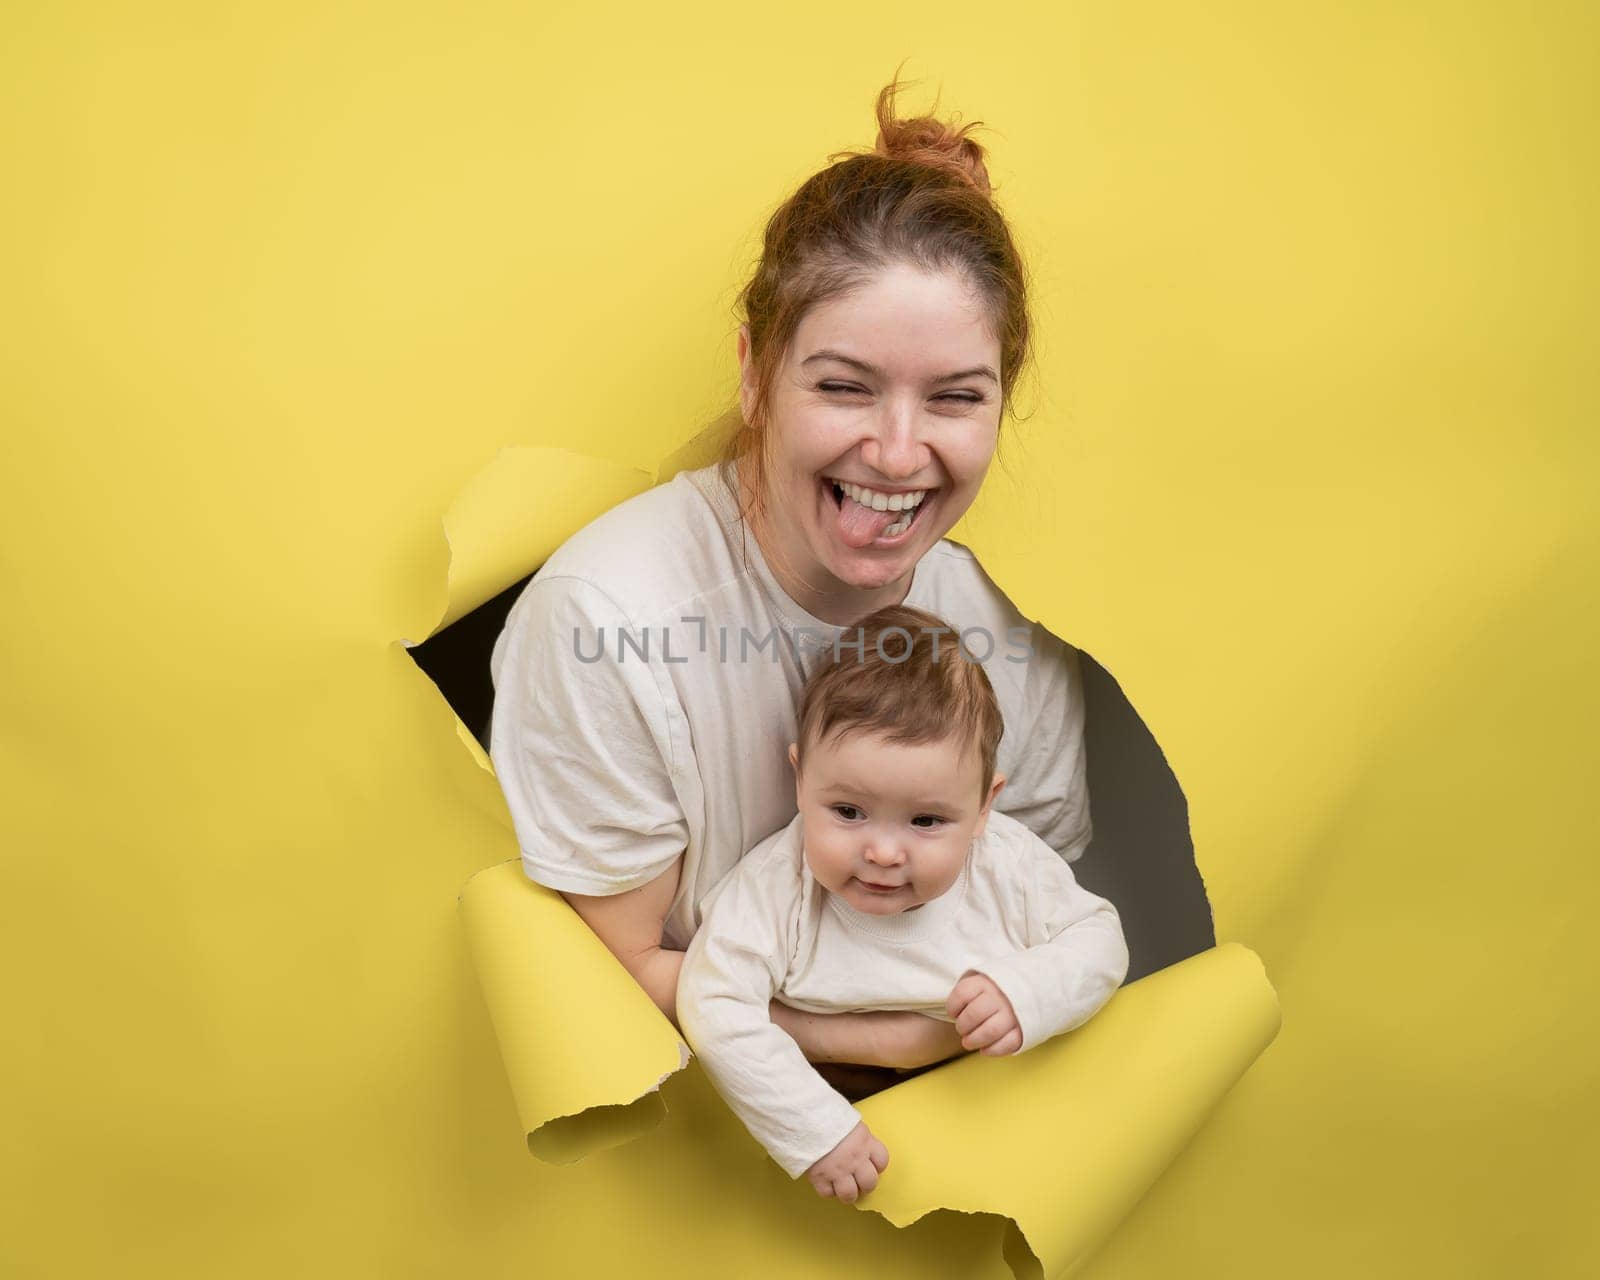 Cheerful Caucasian woman with little son rips and leans out through yellow cardboard background